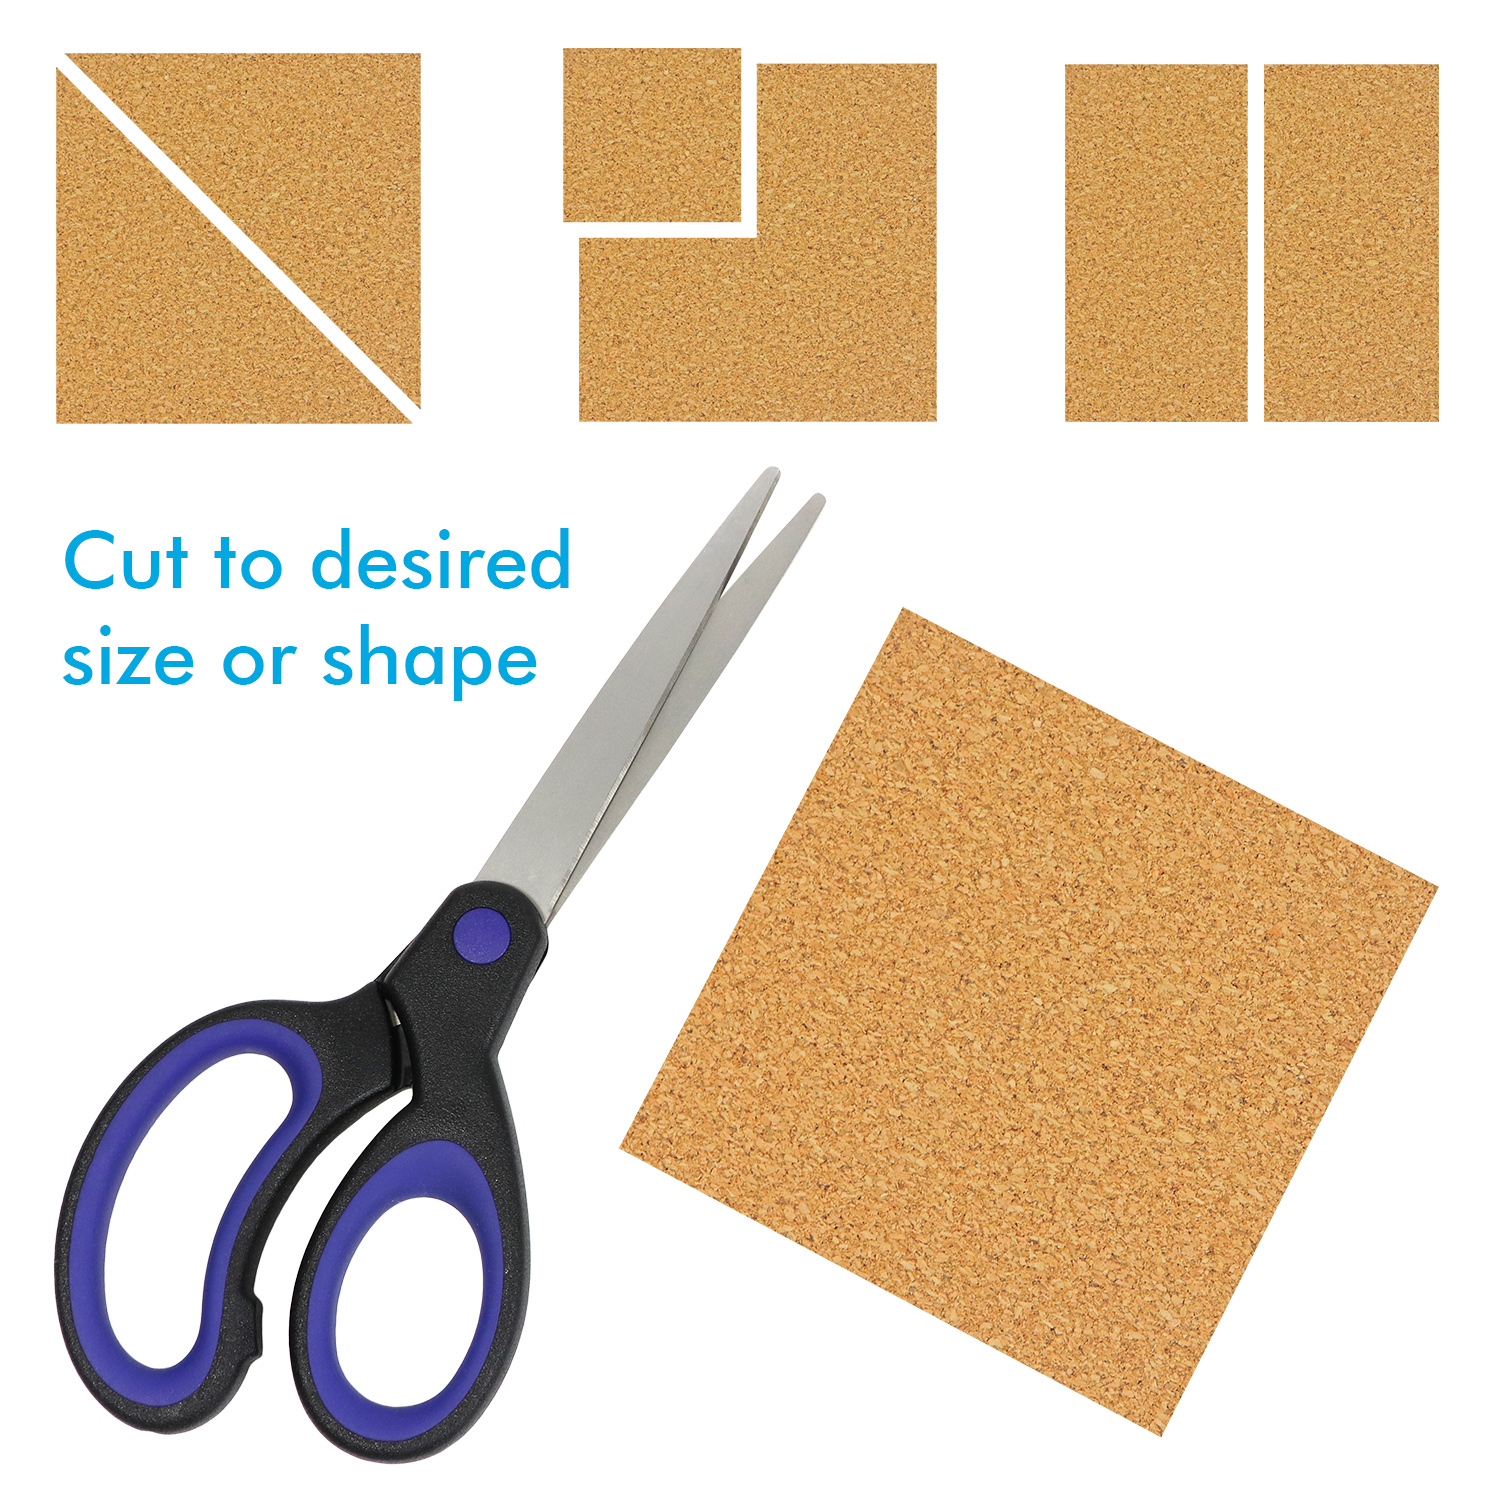 25 Pack Self-Adhesive Cork Squares 4 x 4 Inches, Brown